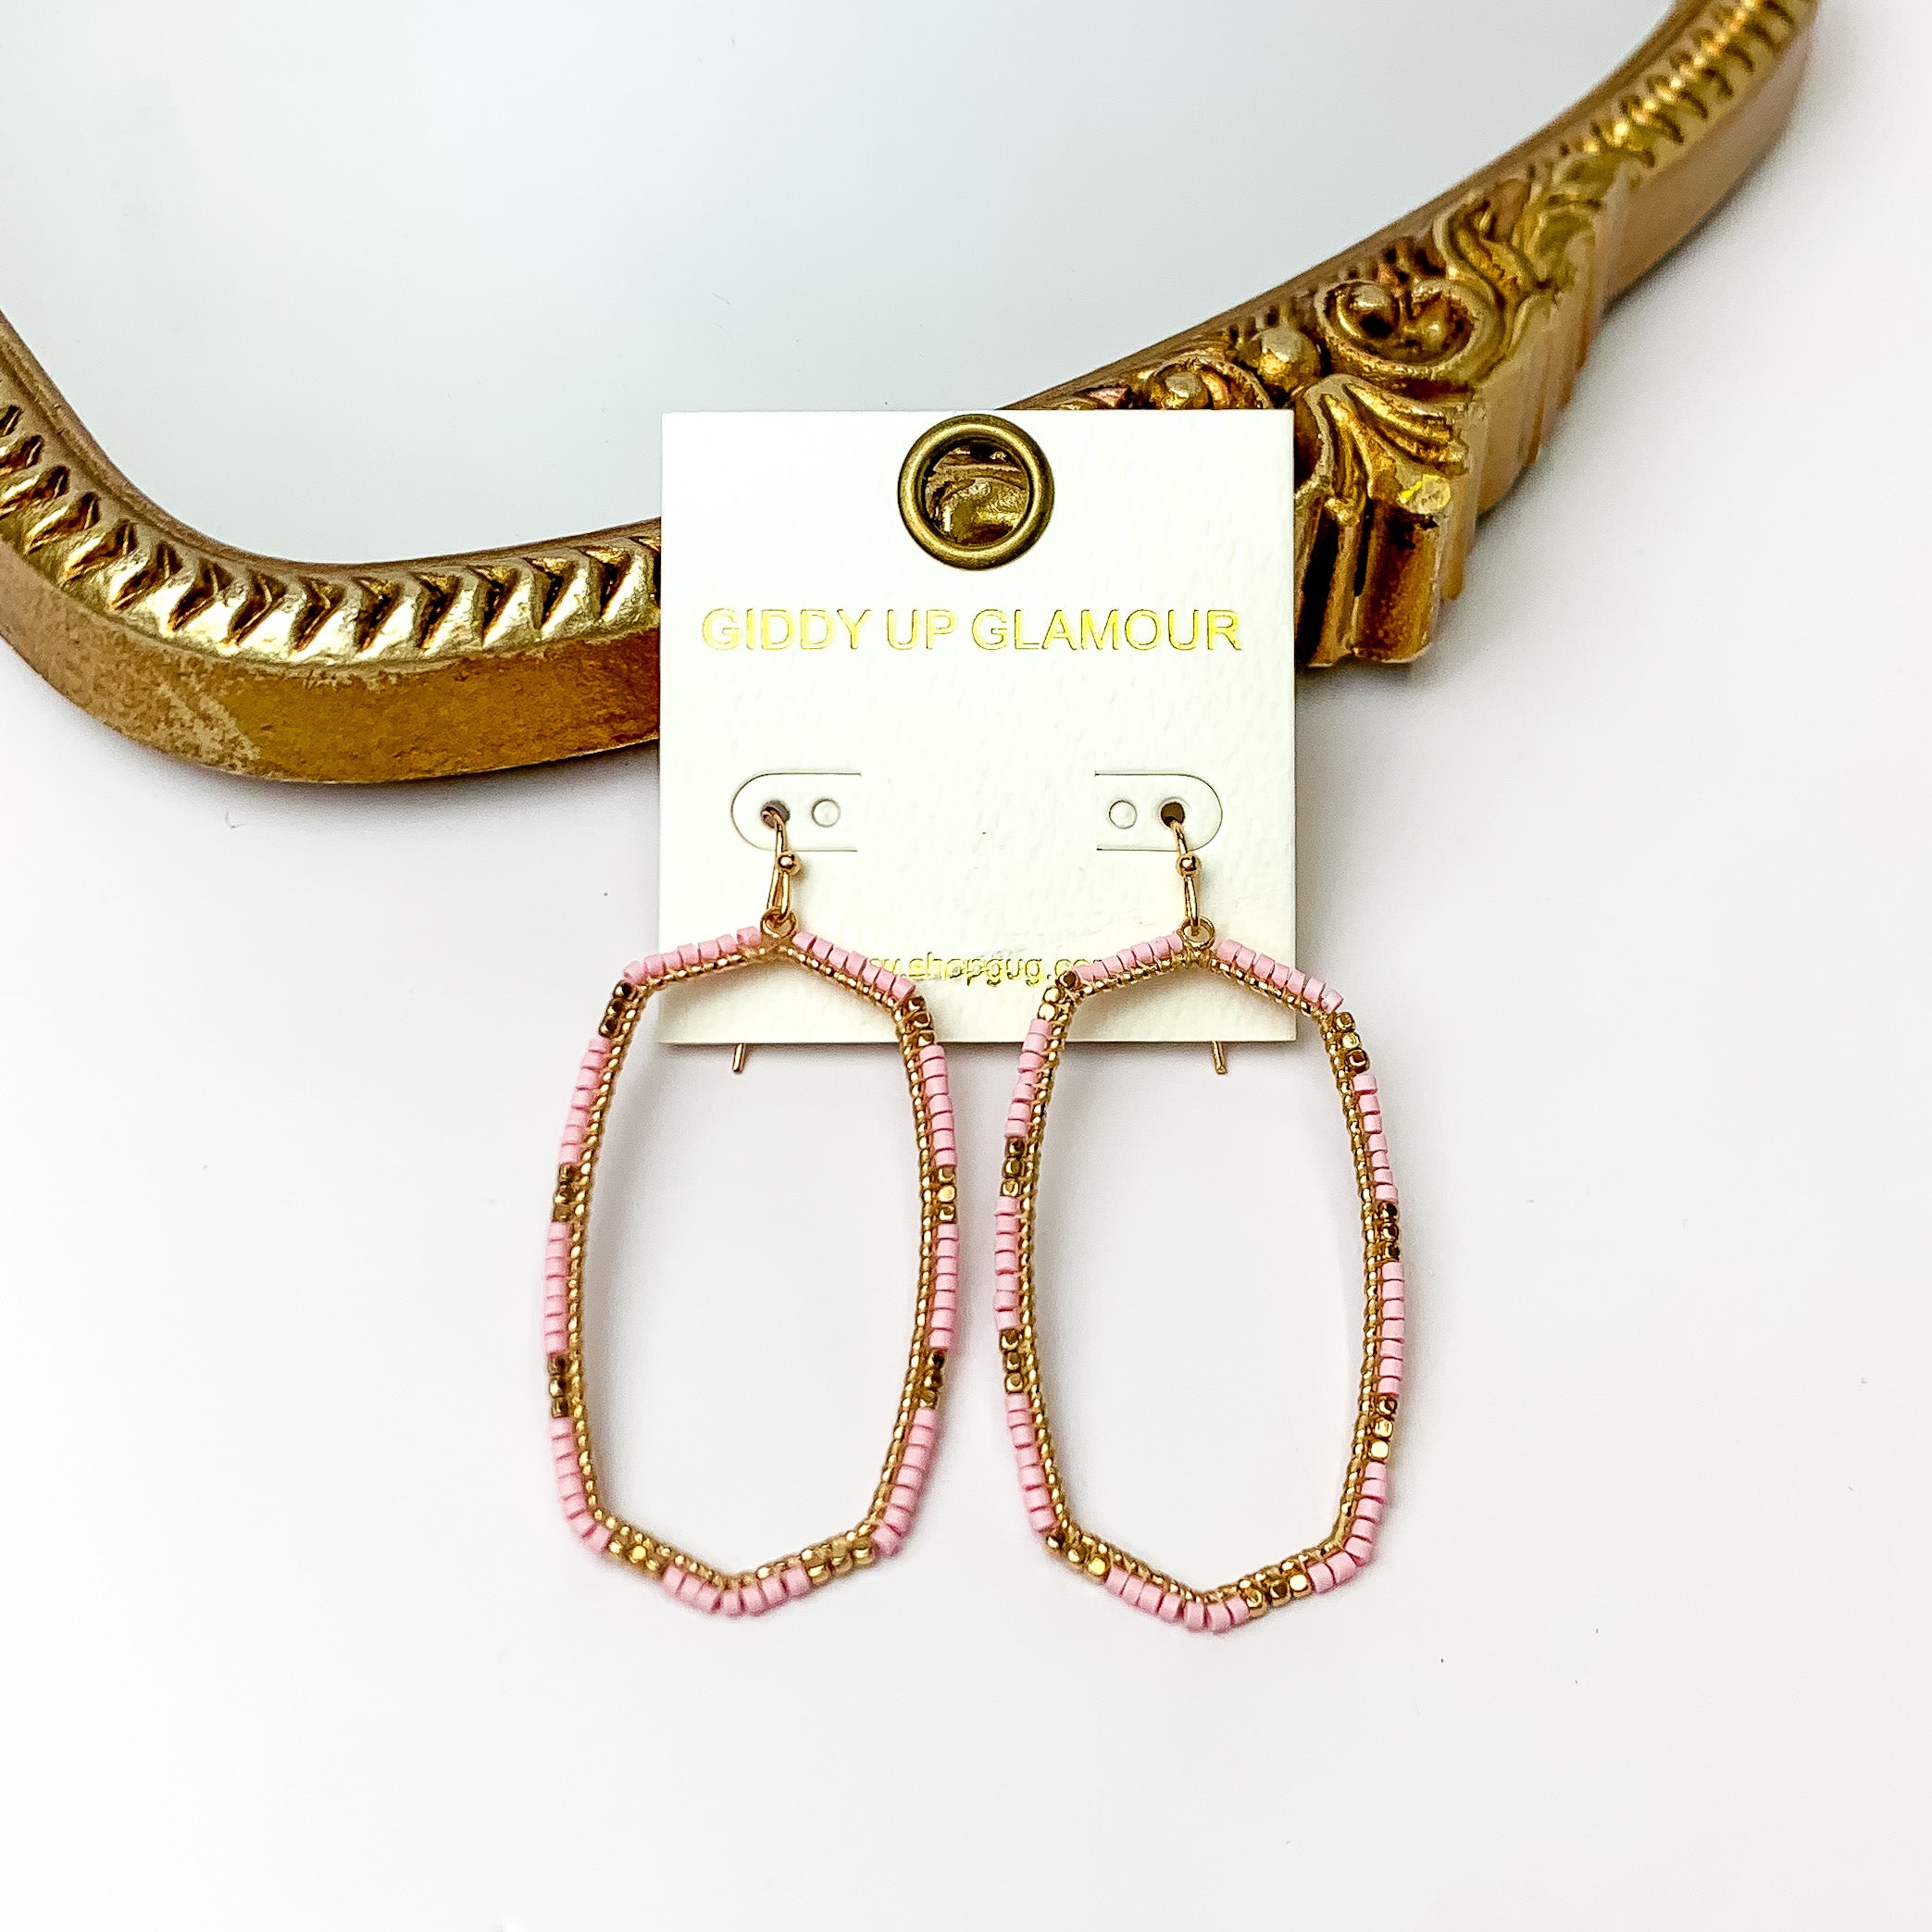 Light Pink Beaded Open Large Drop Earrings with Gold Tone Accessory. Pictured on a white background with a gold frame through it.